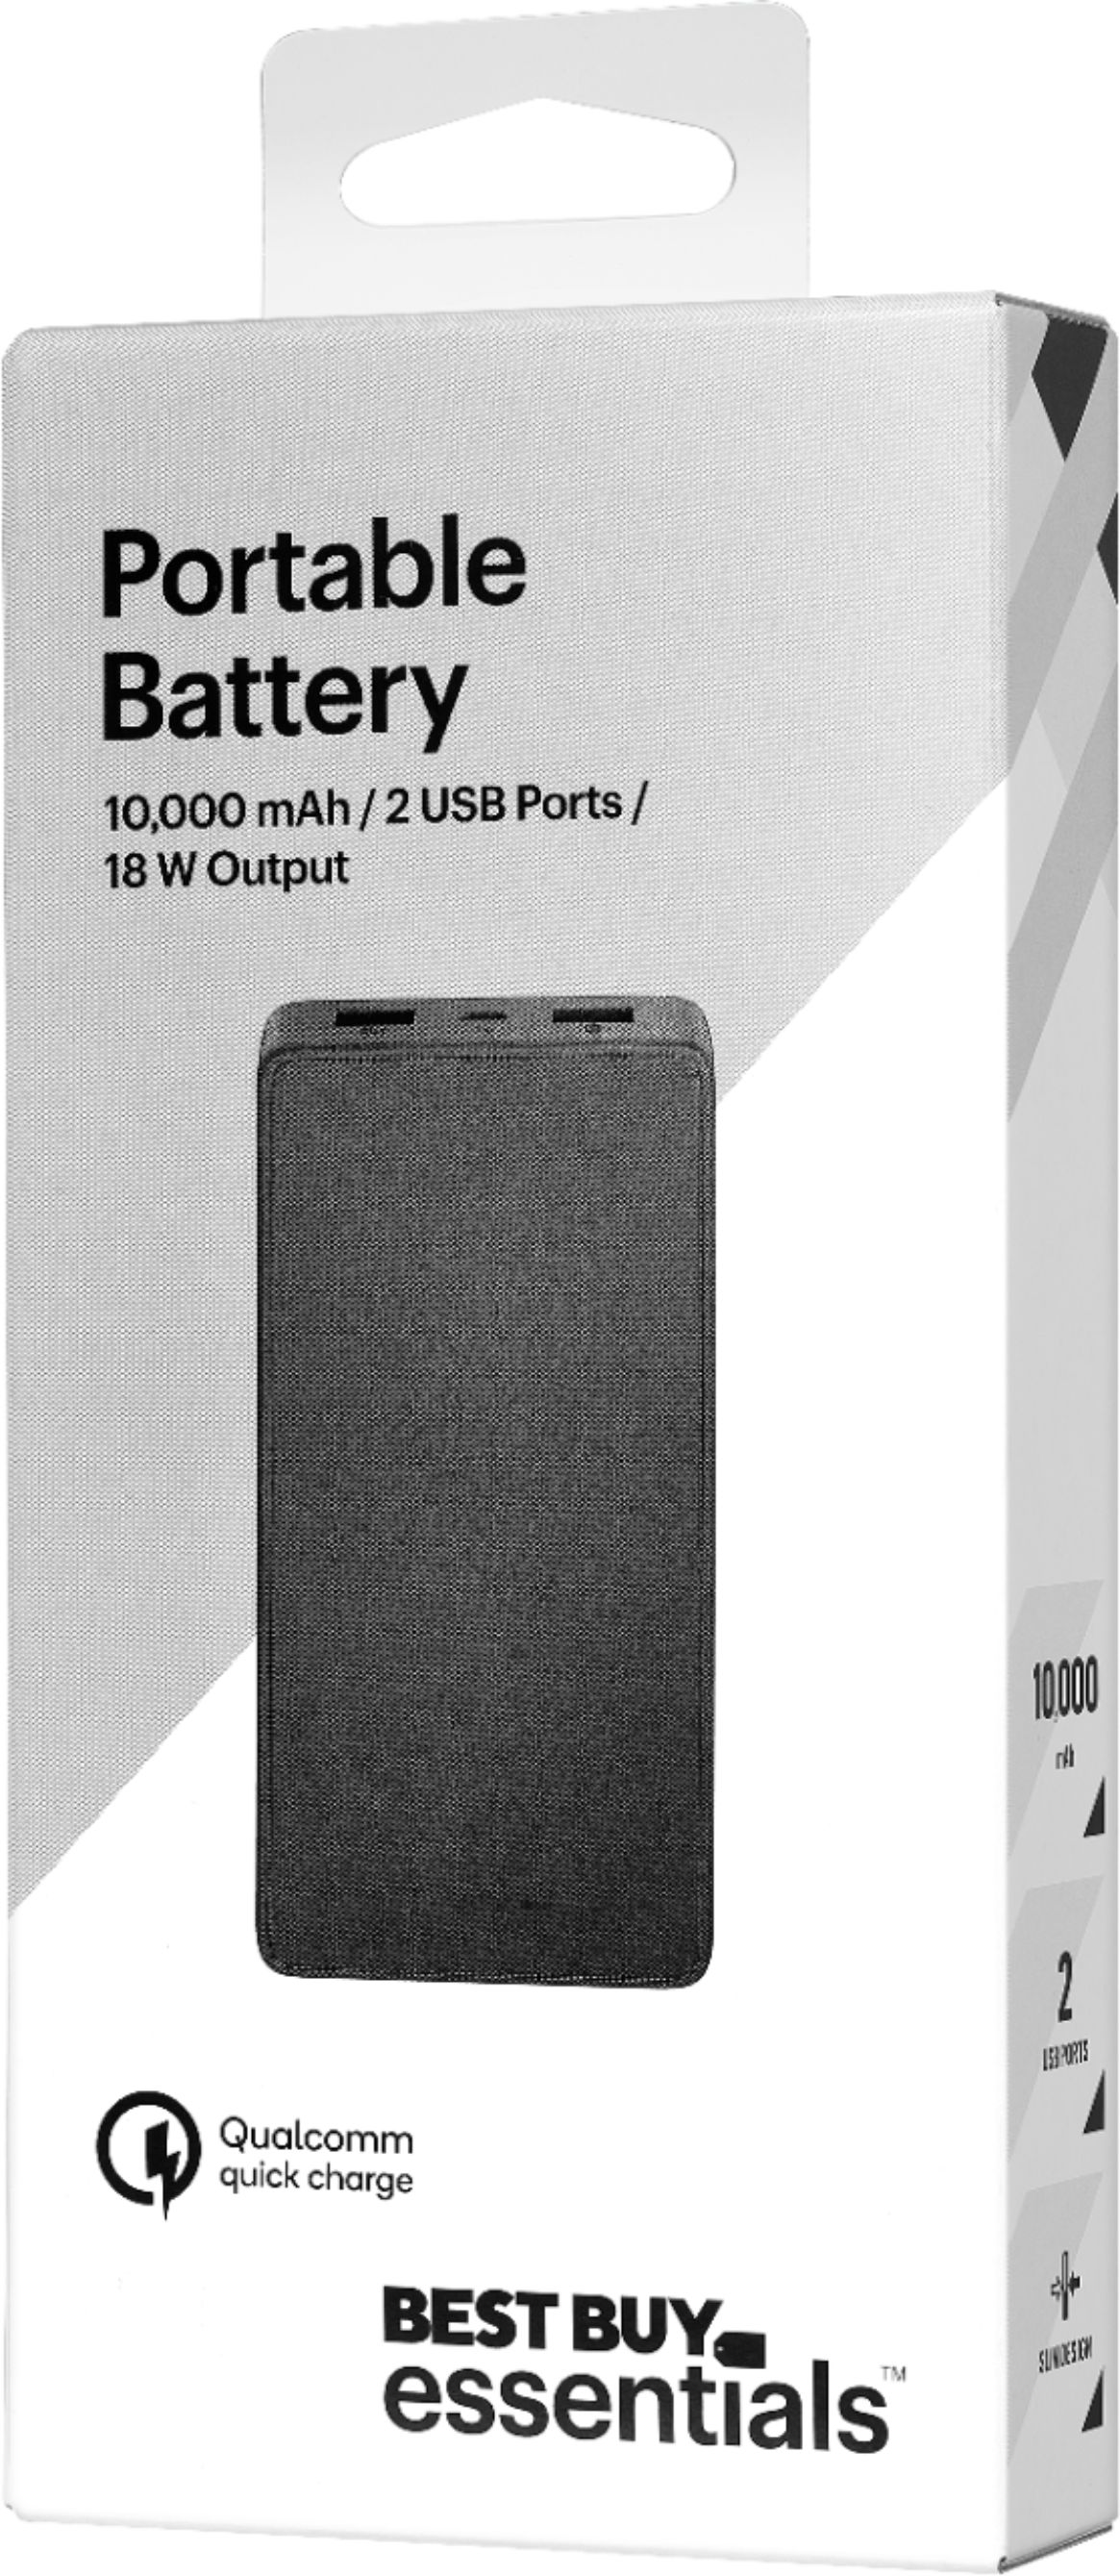 Best Buy essentials™ 18 10,000 mAh Portable Charger for USB Black BE-MMB10K22K - Best Buy